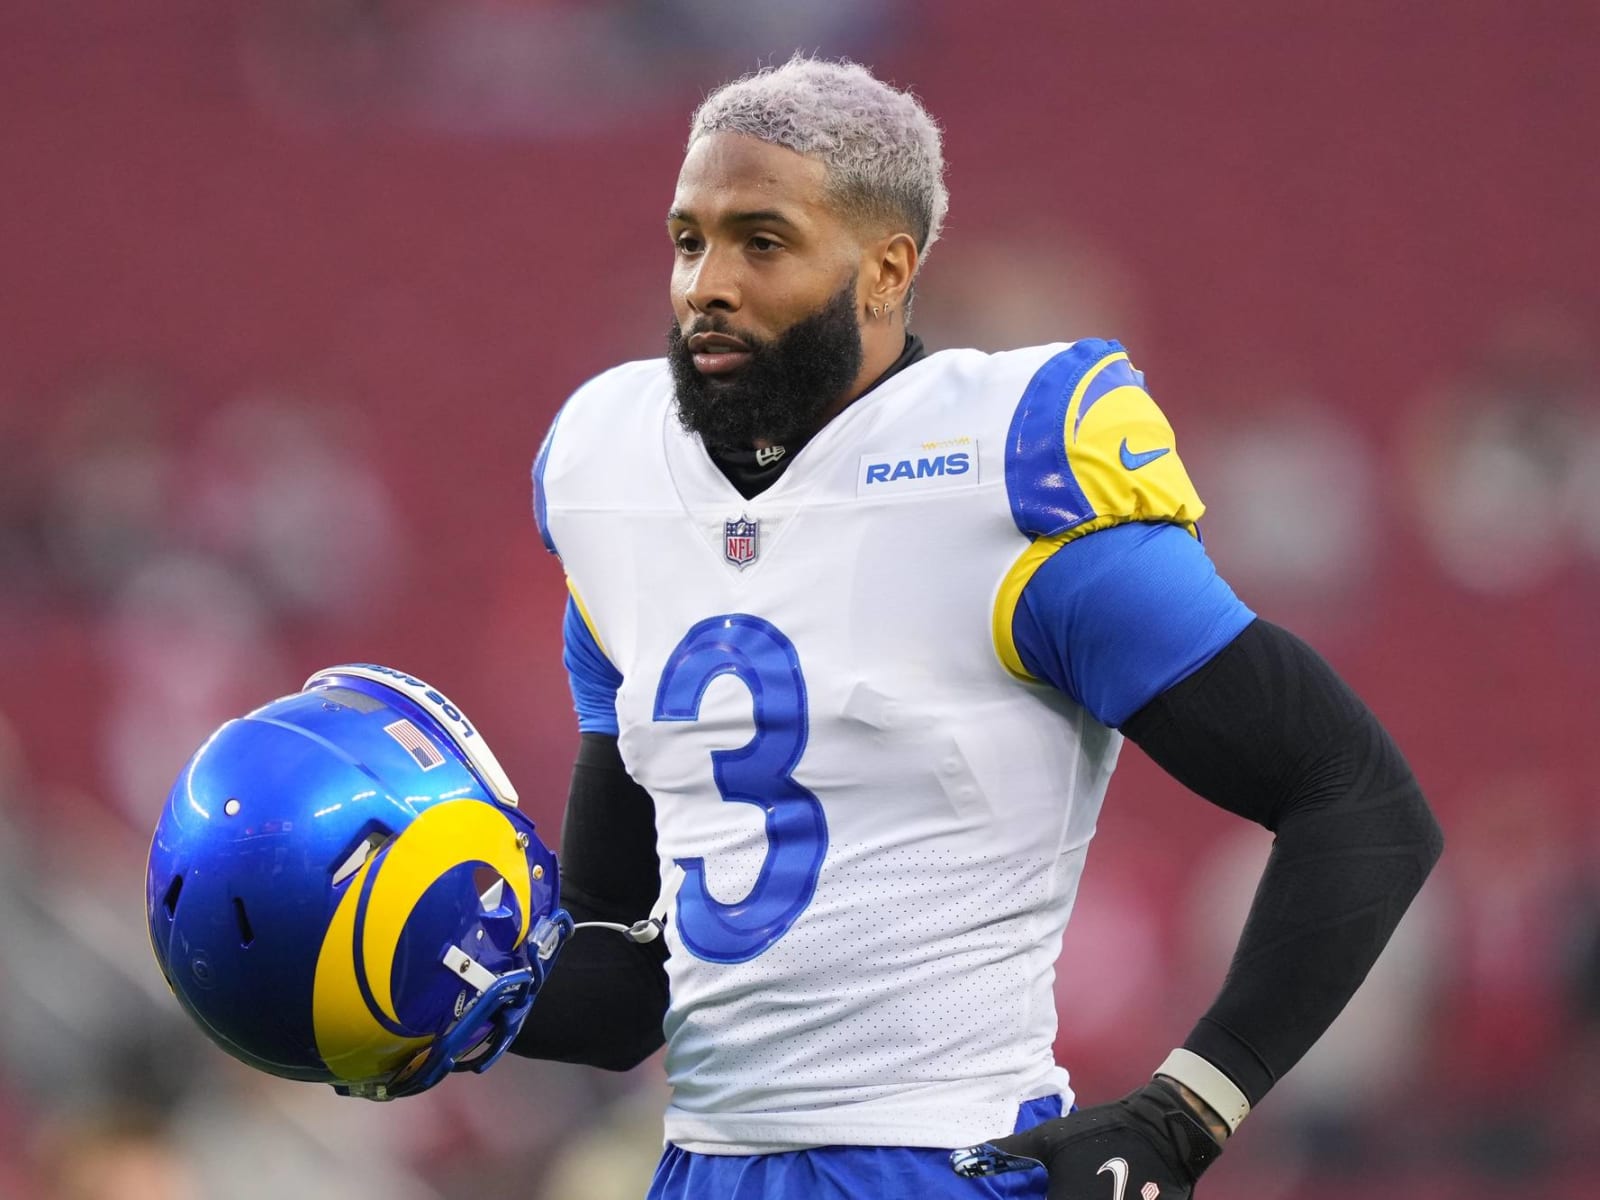 Odell Beckham Jr. Pays Tribute to Late Virgil Abloh Ahead of Rams Game